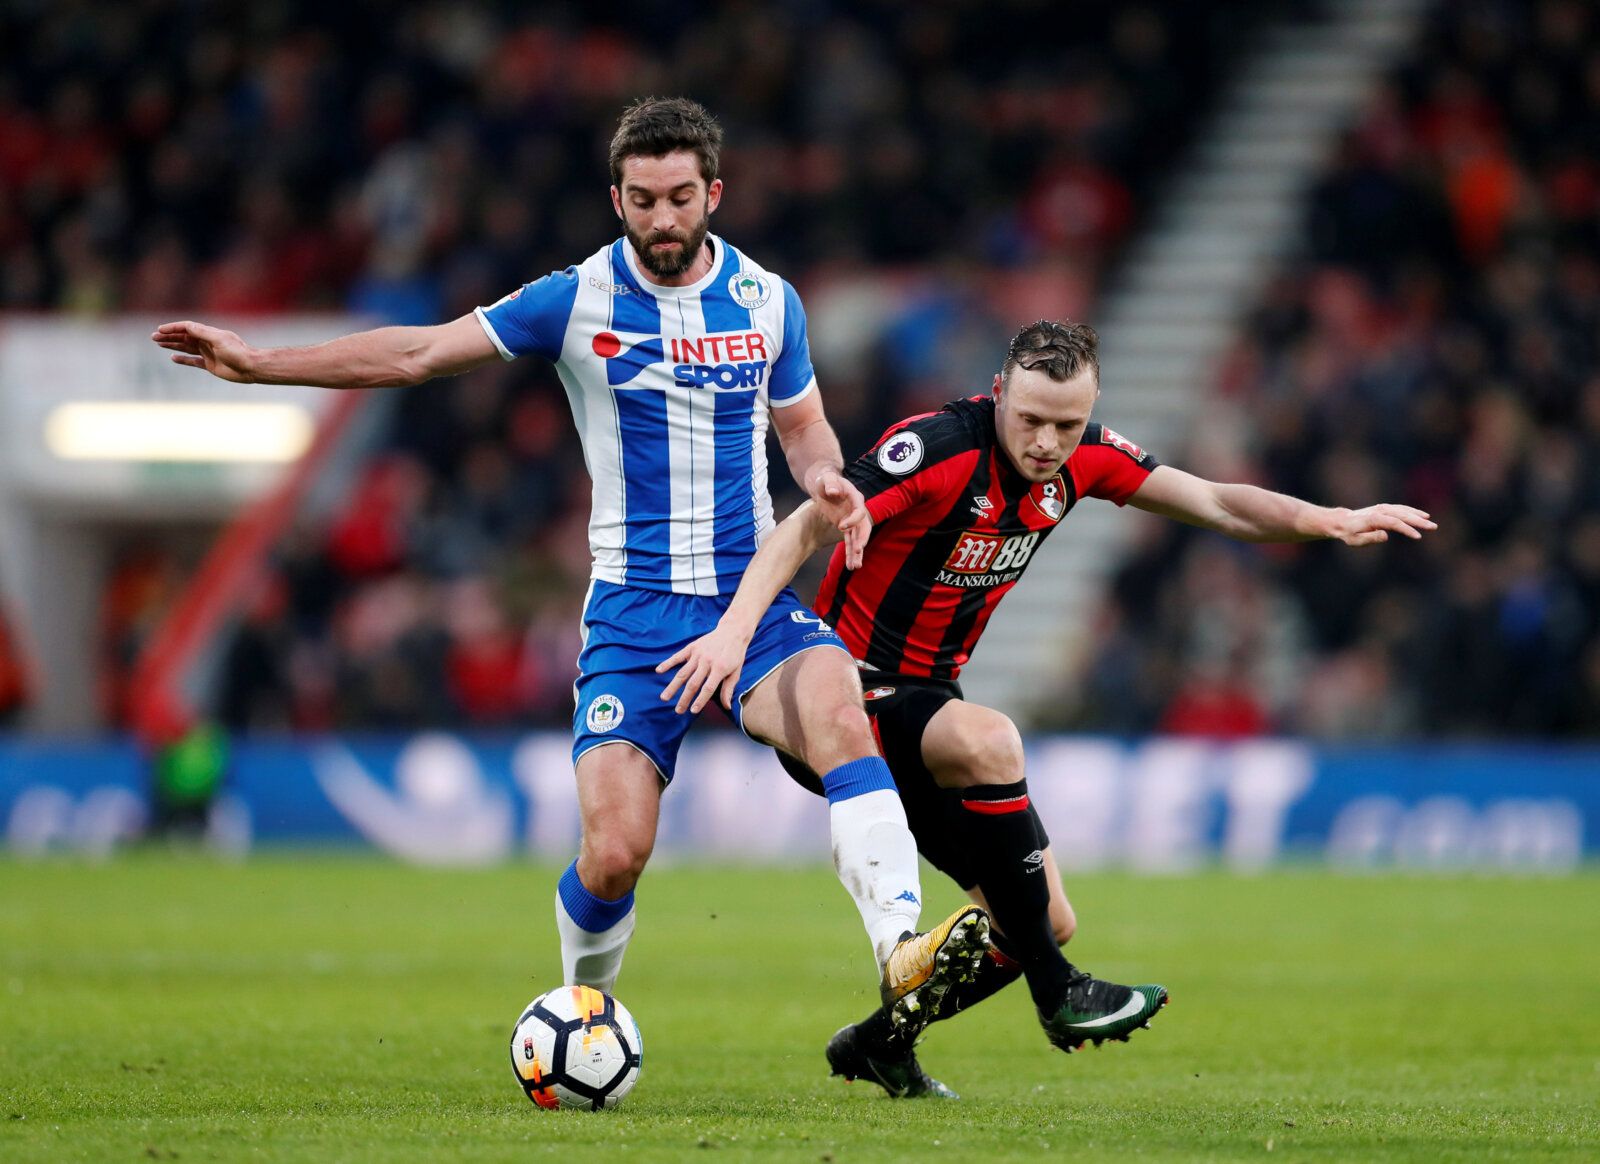 Soccer Football - FA Cup Third Round - AFC Bournemouth vs Wigan Athletic - Vitality Stadium, Bournemouth, Britain - January 6, 2018   Wigan Athletic’s Will Grigg in action with Bournemouth's Brad Smith    Action Images via Reuters/Matthew Childs